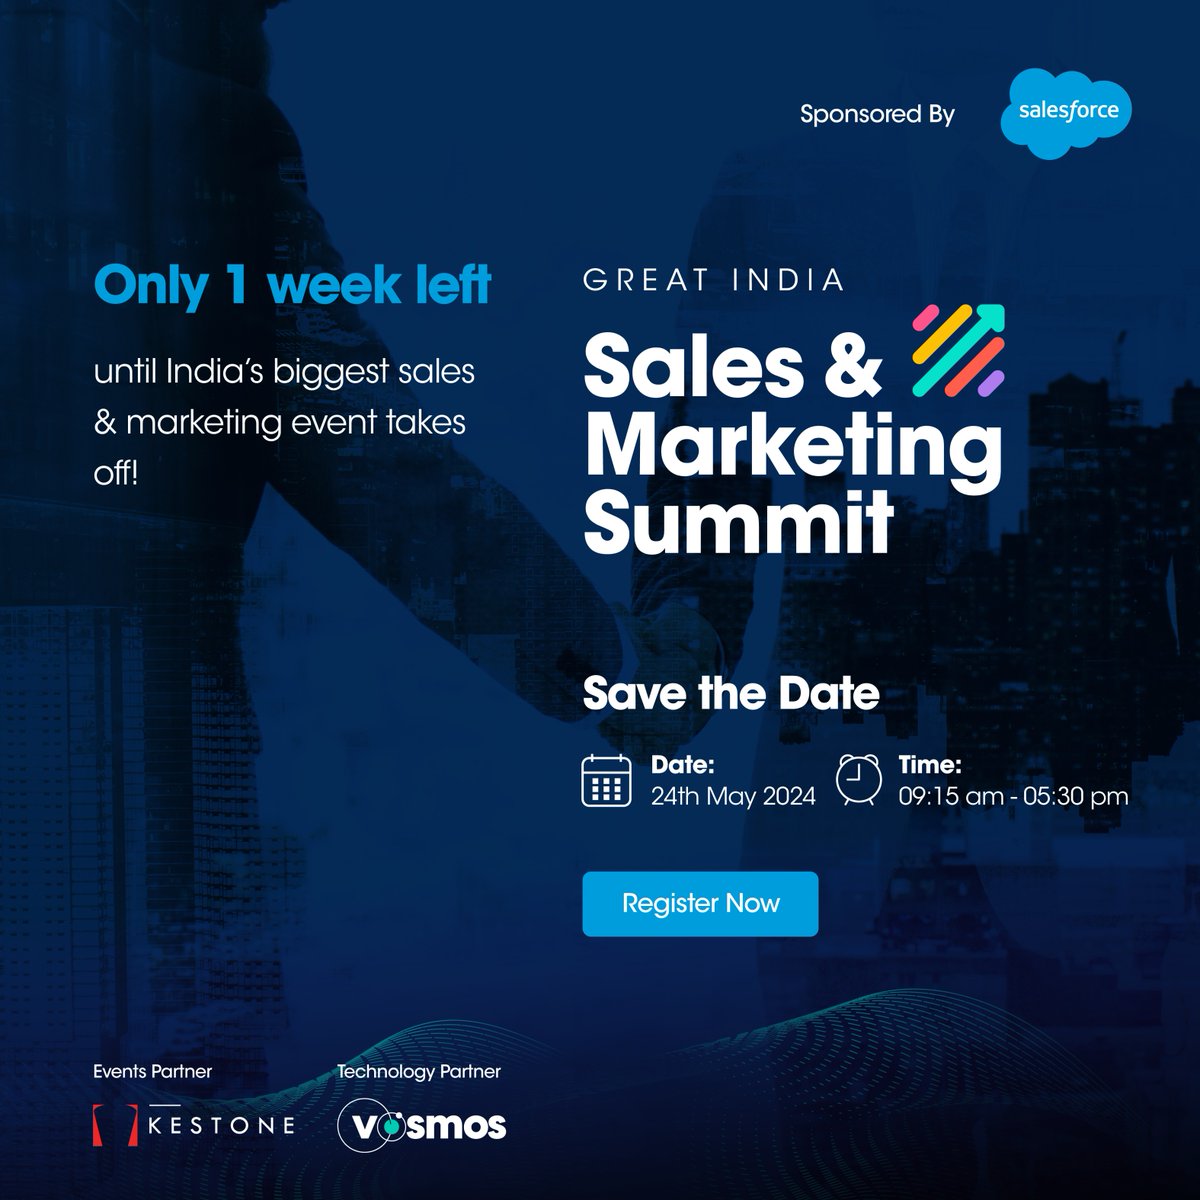 The countdown has begun! Just 1 week until the Great India Sales & Marketing Summit 2024 blasts off into the virtual world. Secure your spot now: bit.ly/4a9BhjN 📅 24th May 2024 ⏰ 09:15 am - 05:30 pm #1WeekToGo #Salesforce #GISMS #GISMS2024 #SalesandMarketing